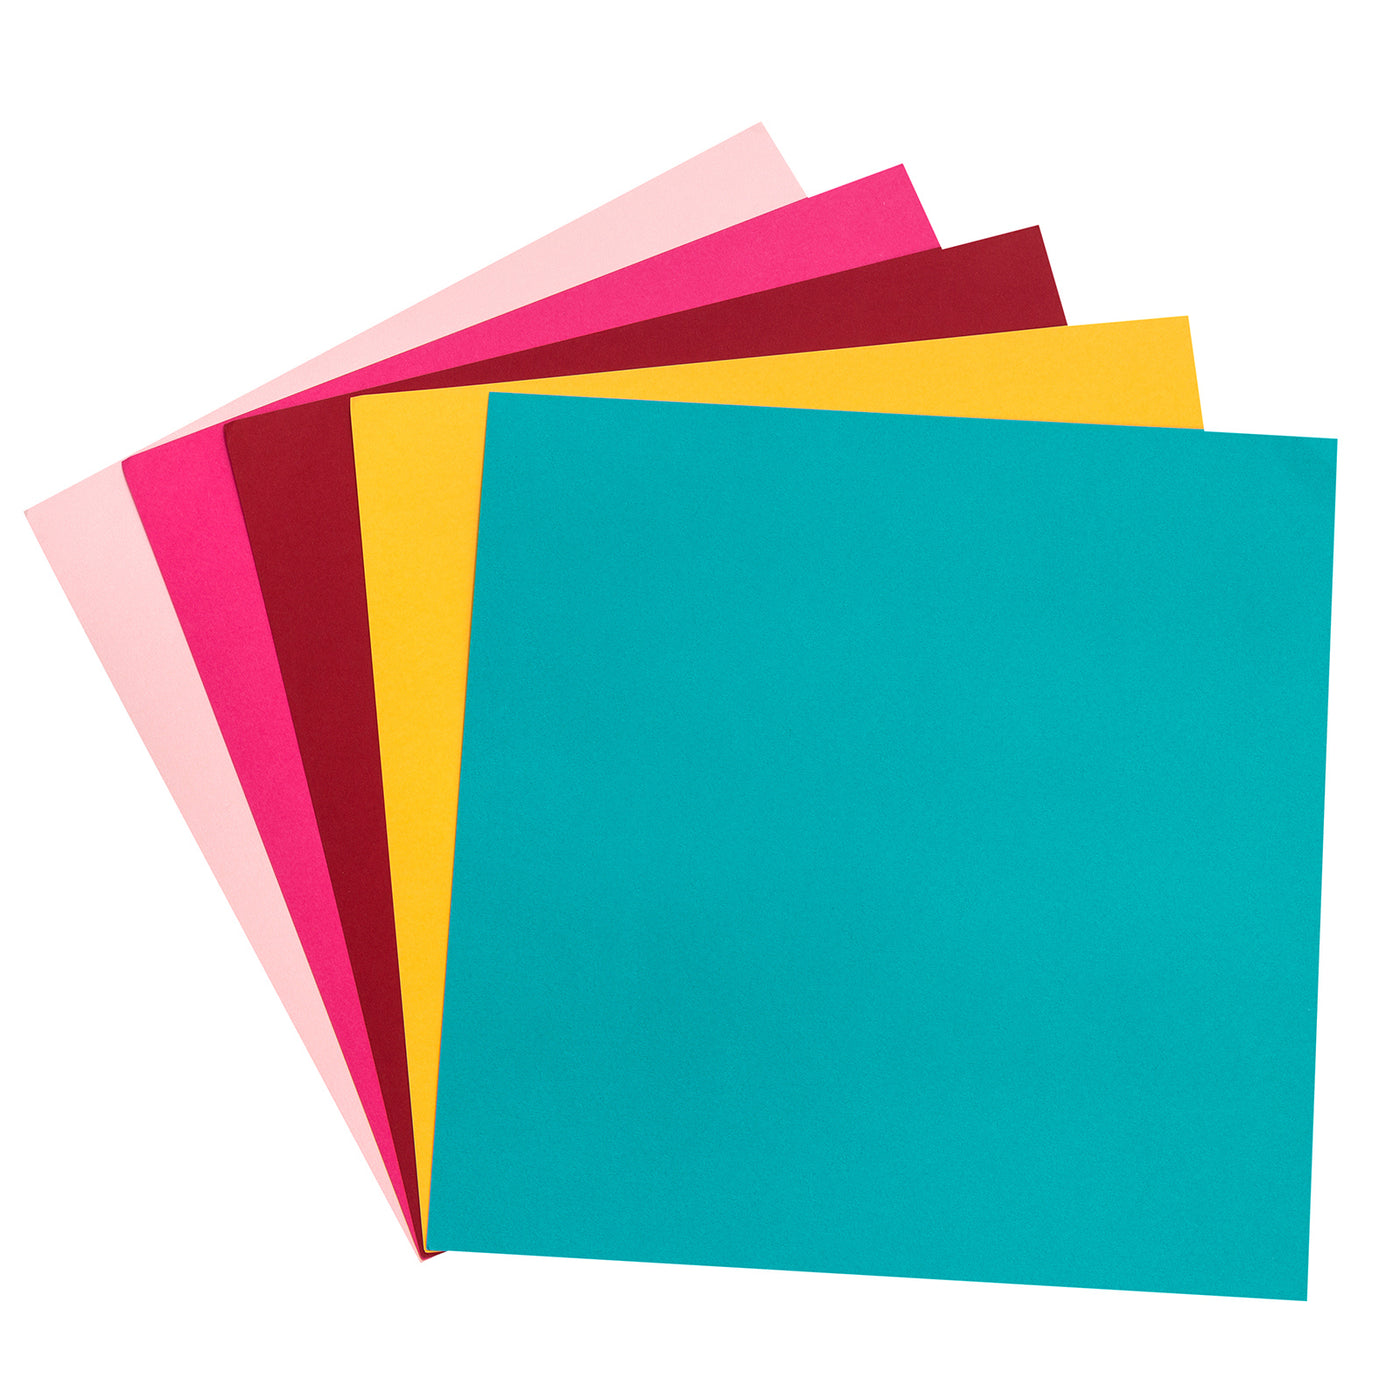 Primary Variety Pack contains 60 sheets of smooth 12x12 cardstock